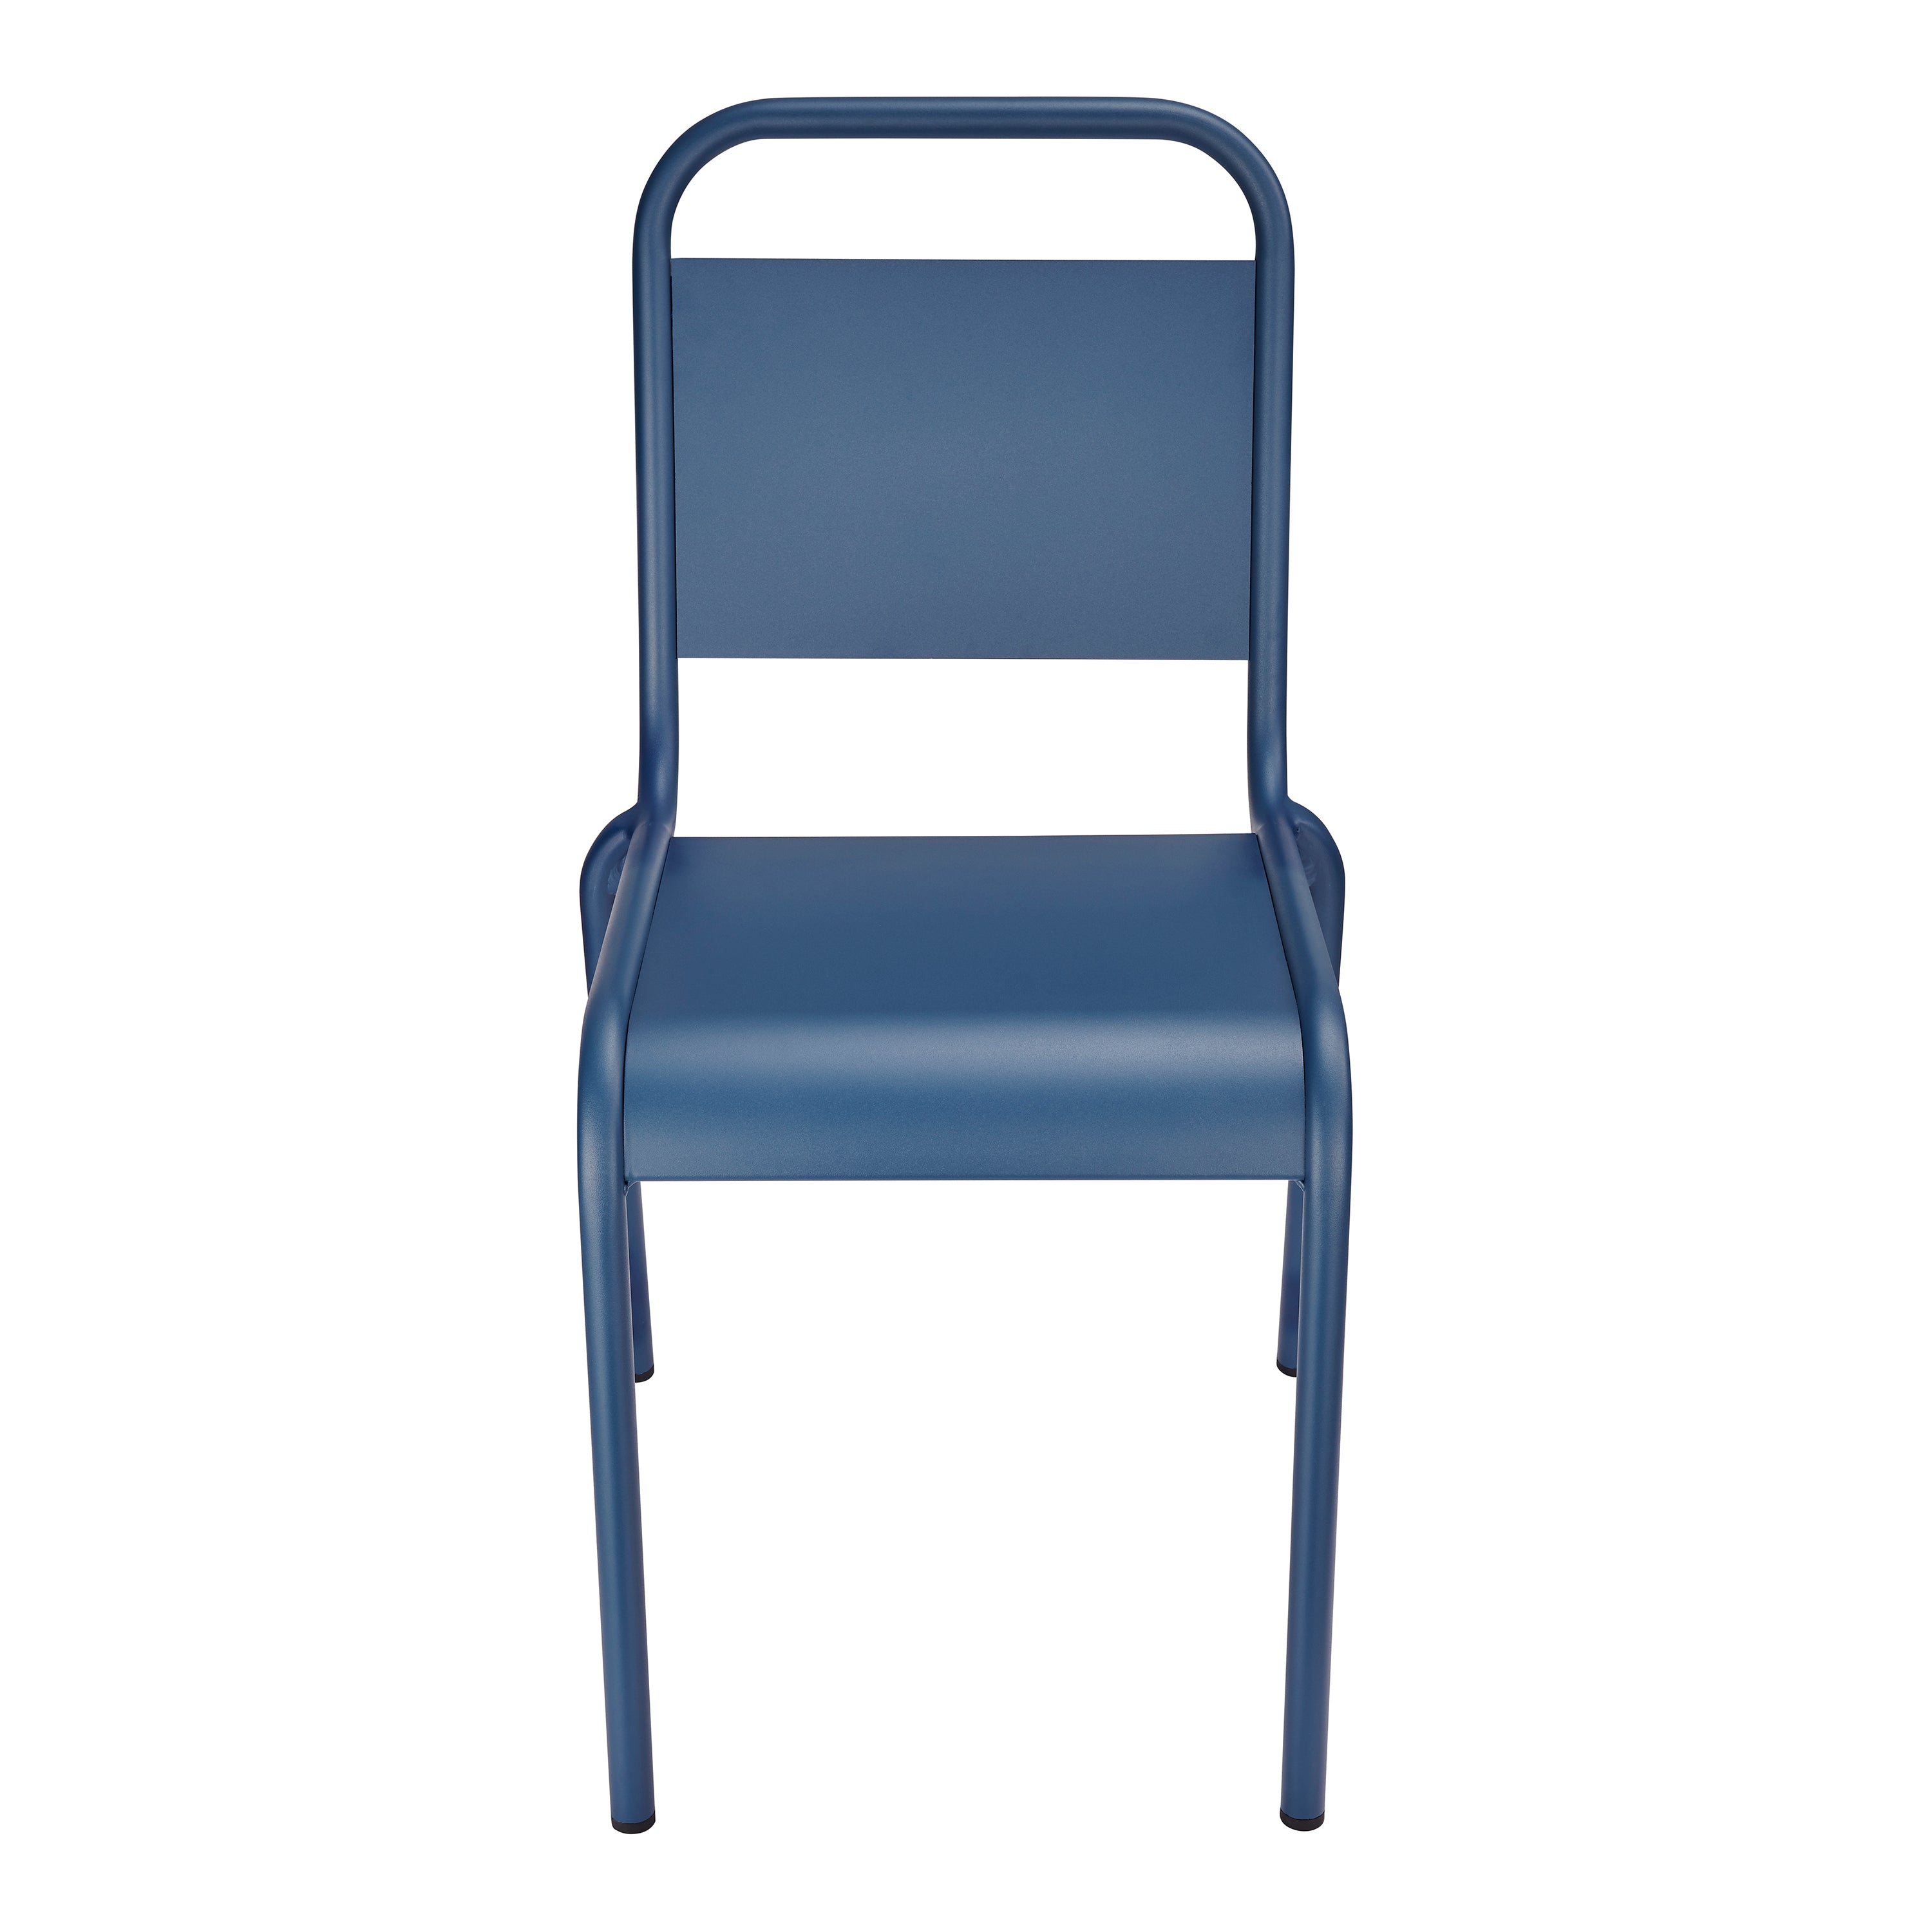 Euro Style Dining Chairs - Otis Outdoor Side Chair in Dark Blue - Set of 2